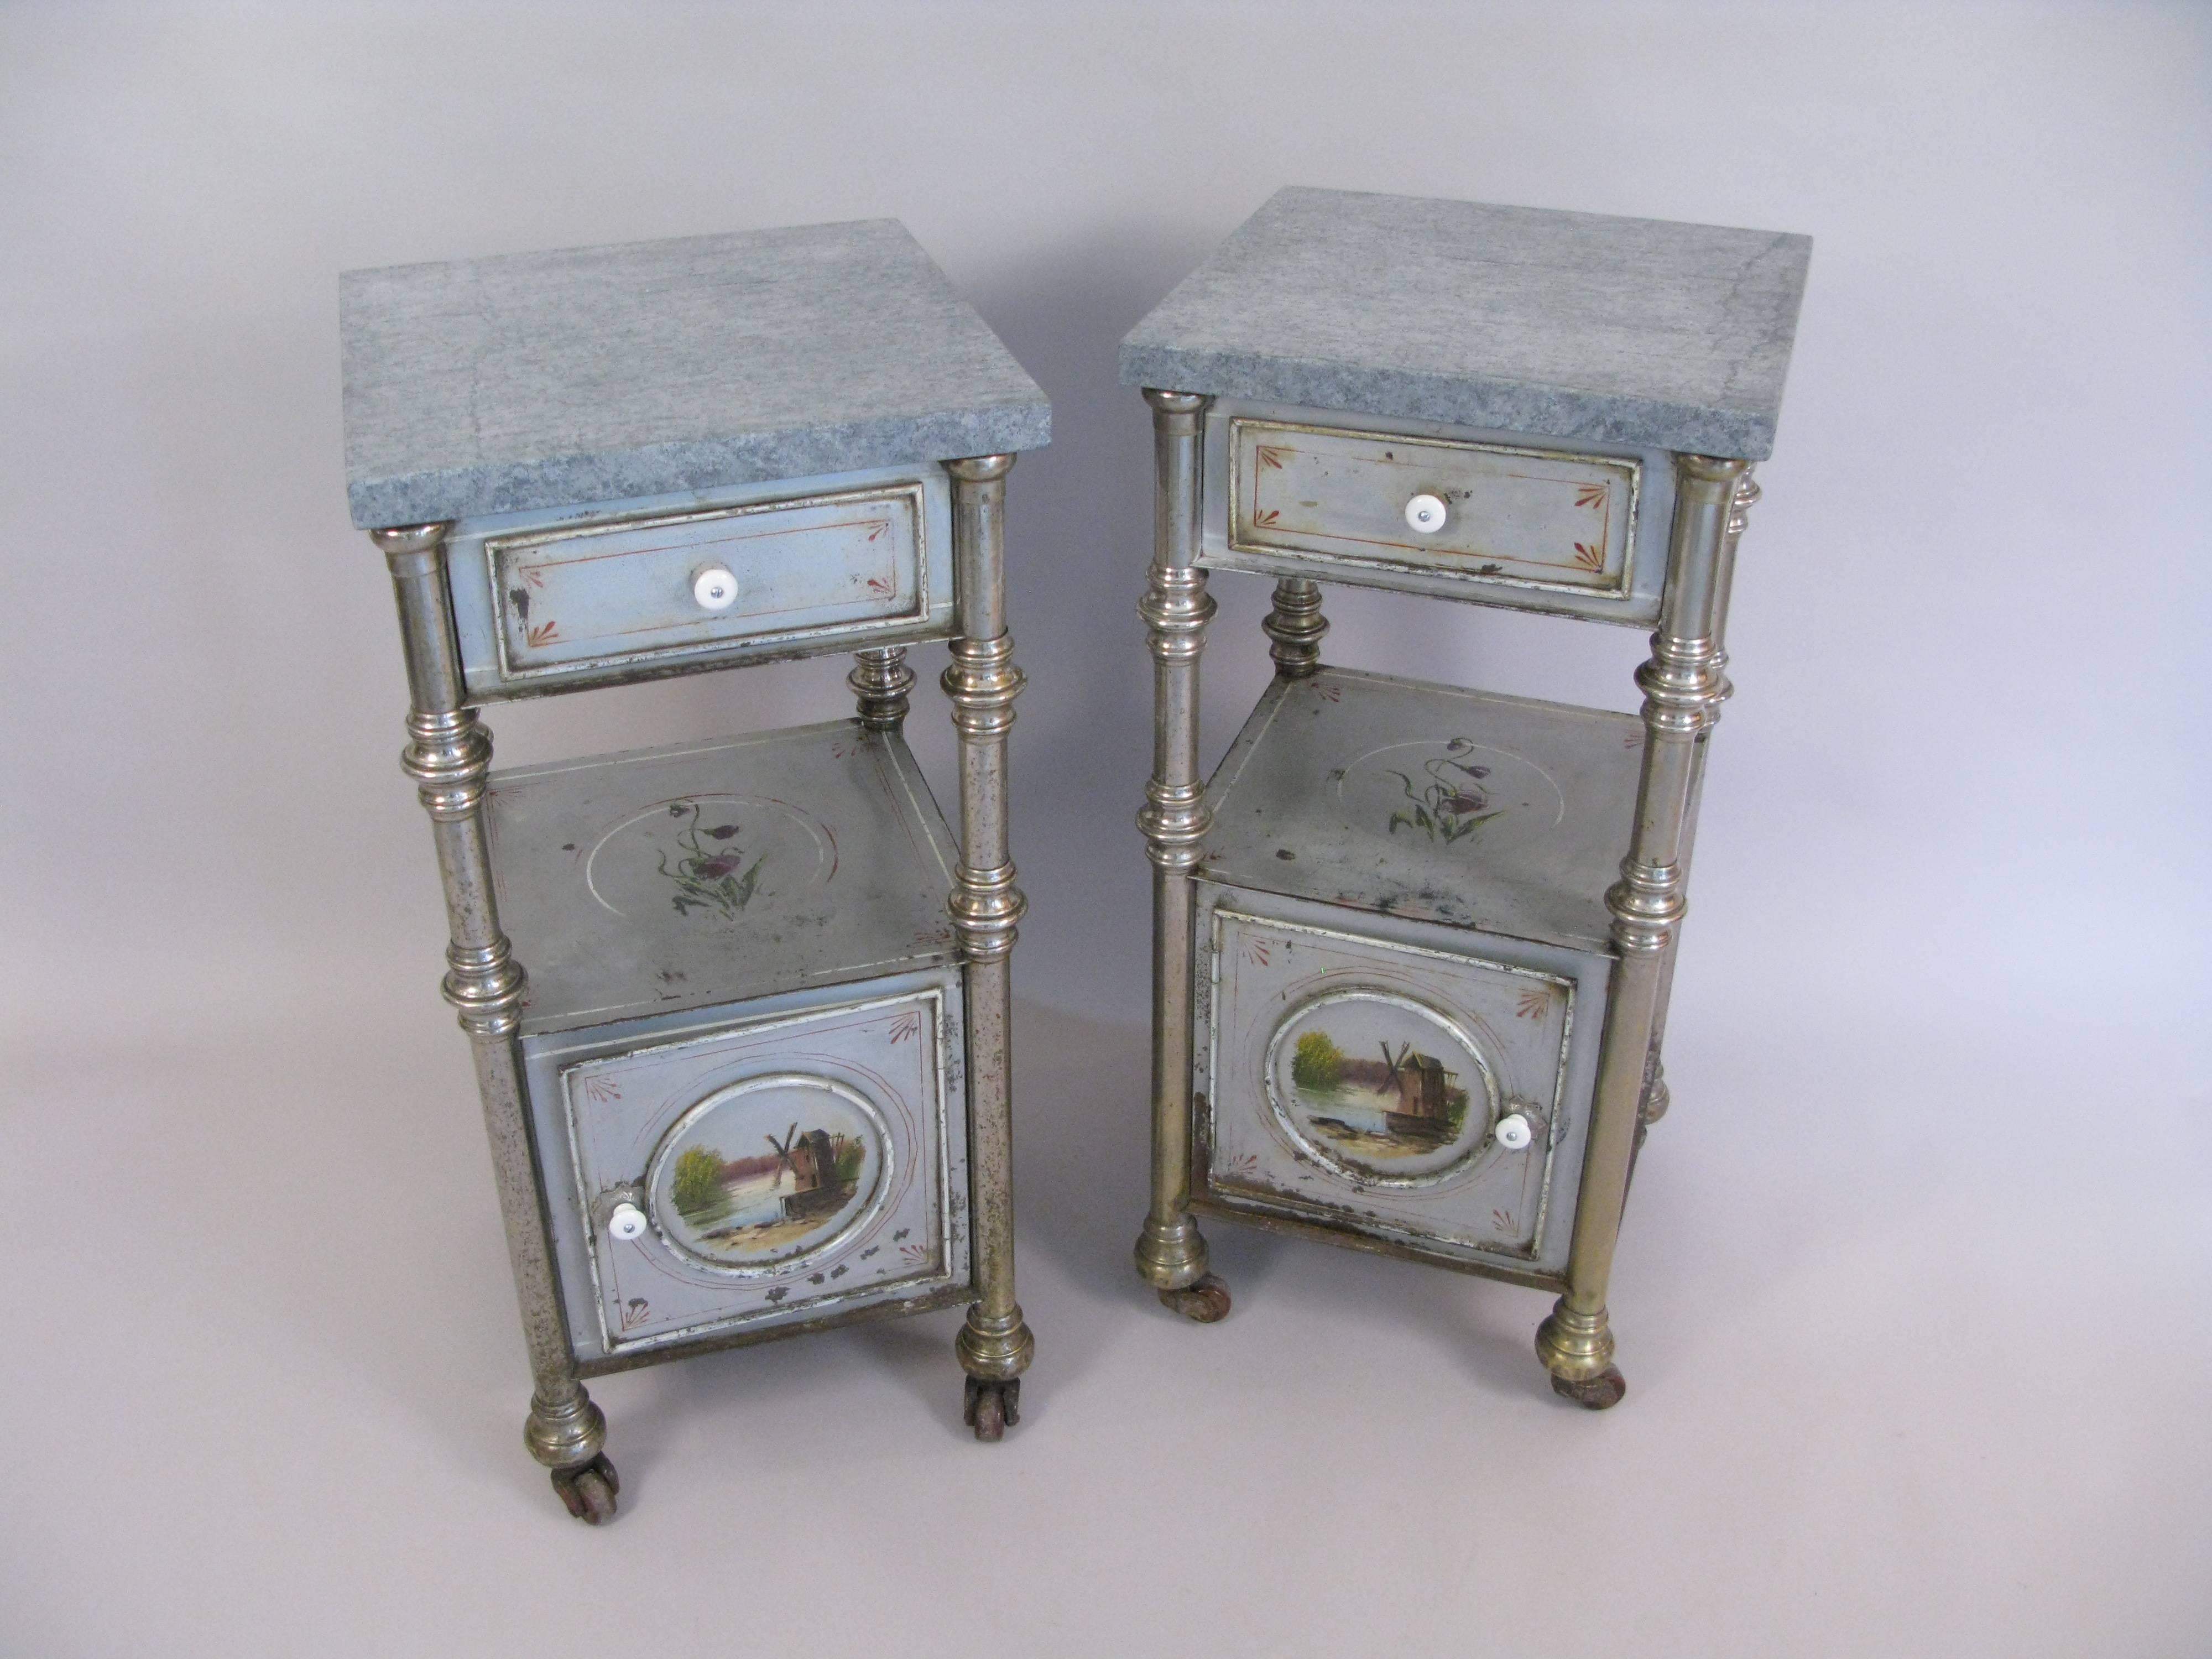 Striking pair of late 19th century bedside decorated metal cabinets with Russian labels on the back. The gray marble tops are later. The stands have been cleaned, but have paint losses, surface rust, and usage. That also means great aged patina. A